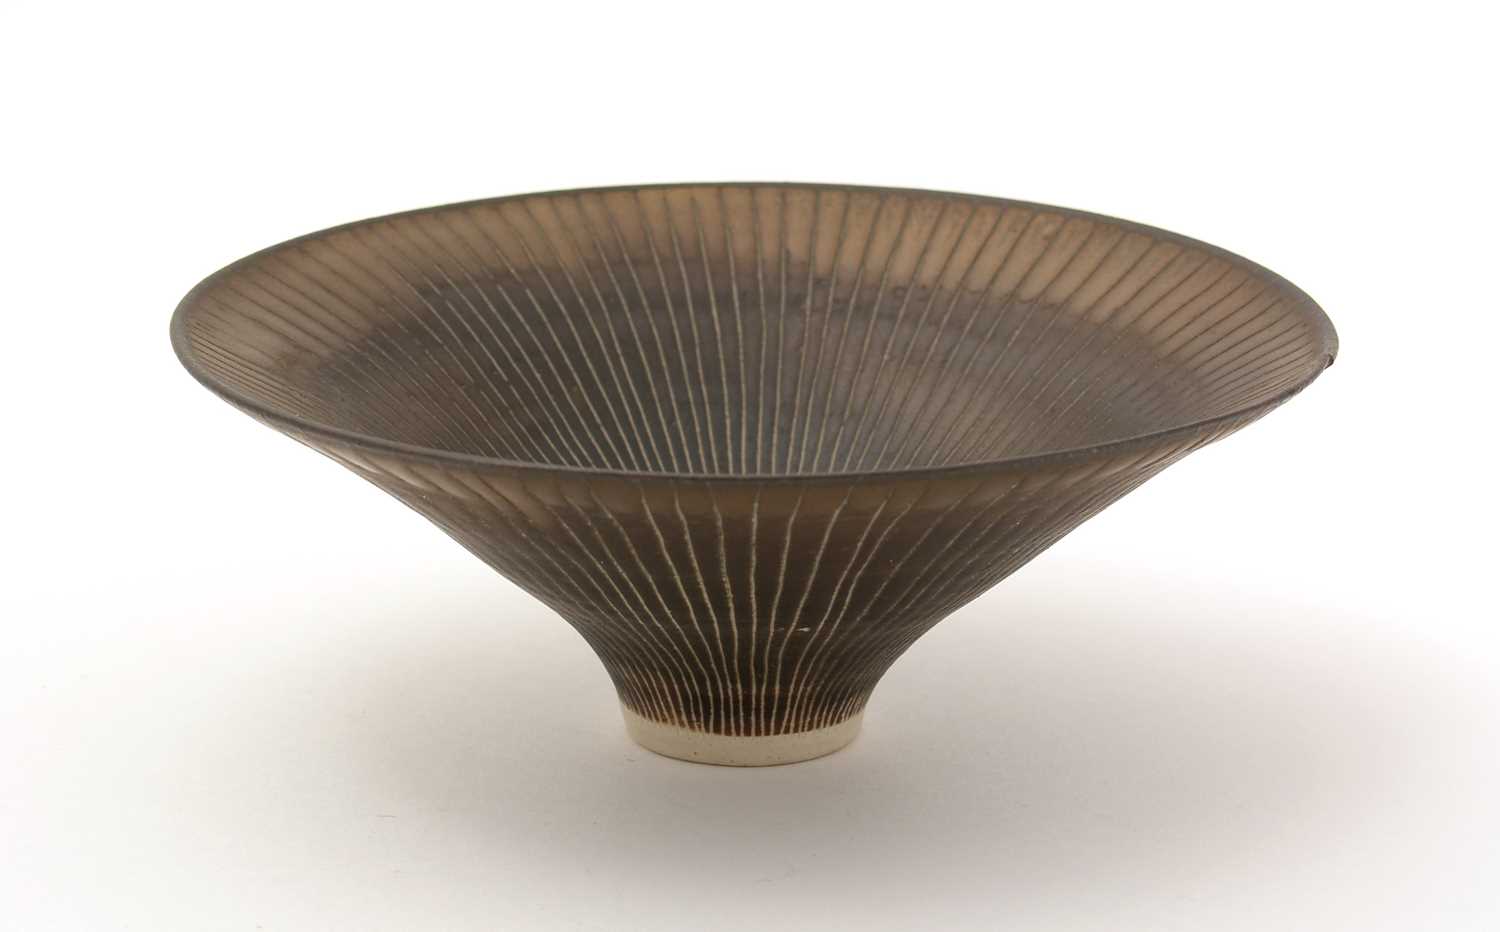 422 - Lucy Rie conical bowl